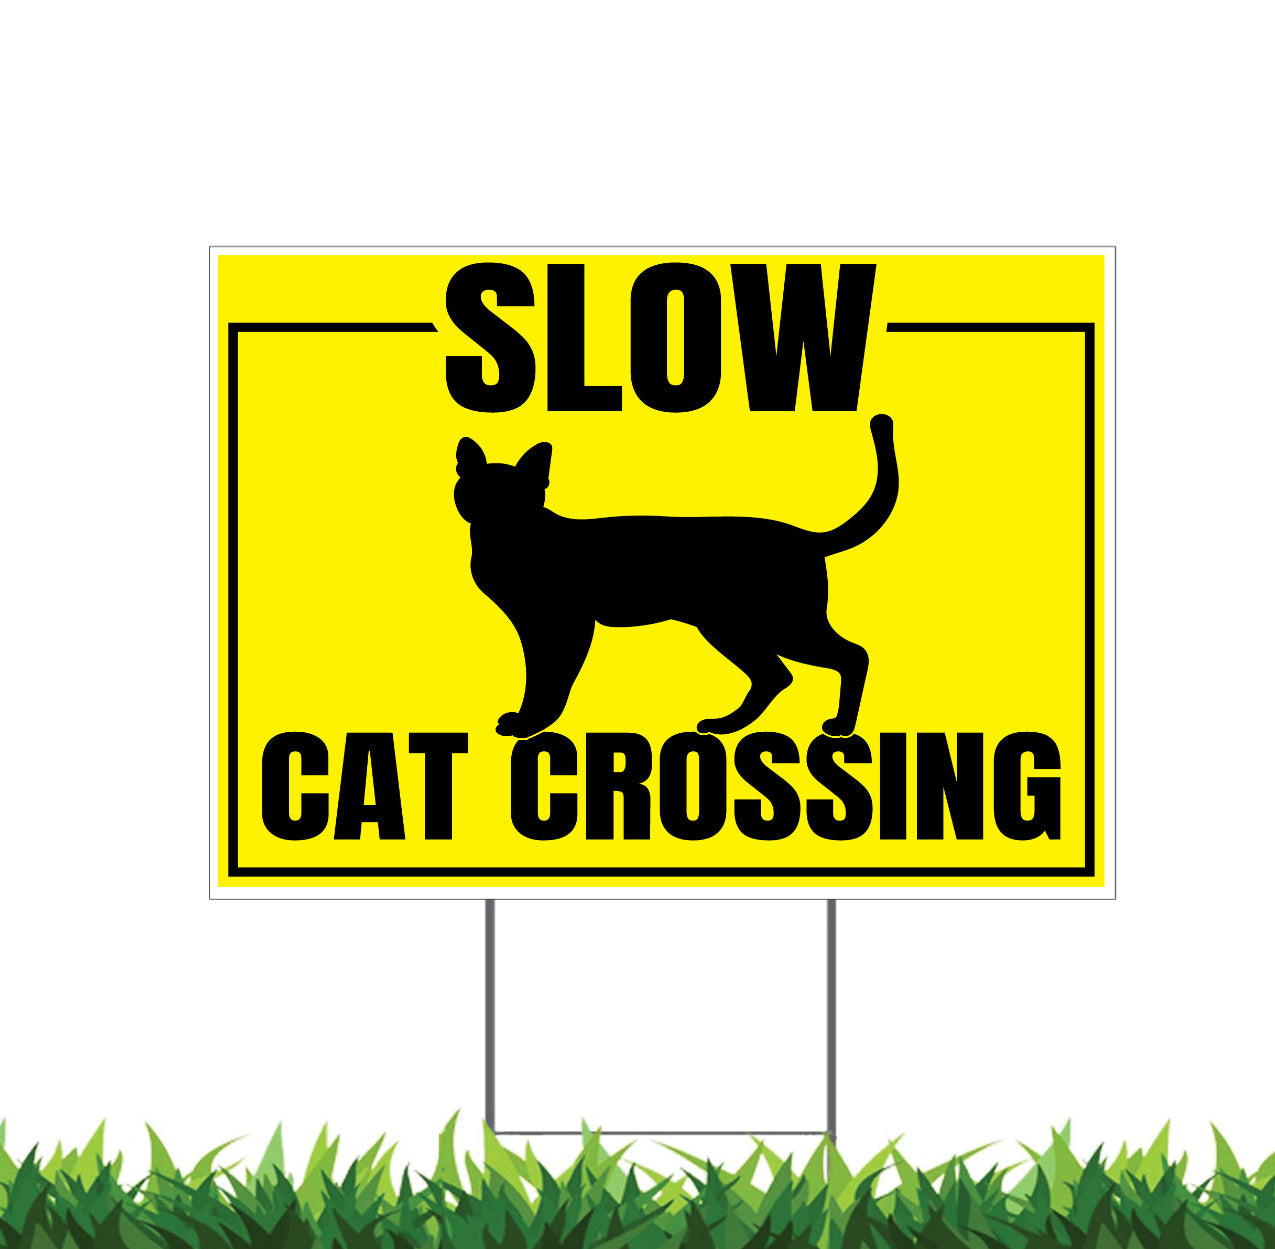 Cat Crossing Yard Sign, Double Sided, H-Stake Included, 18x12, 24x18, 36x24, v1